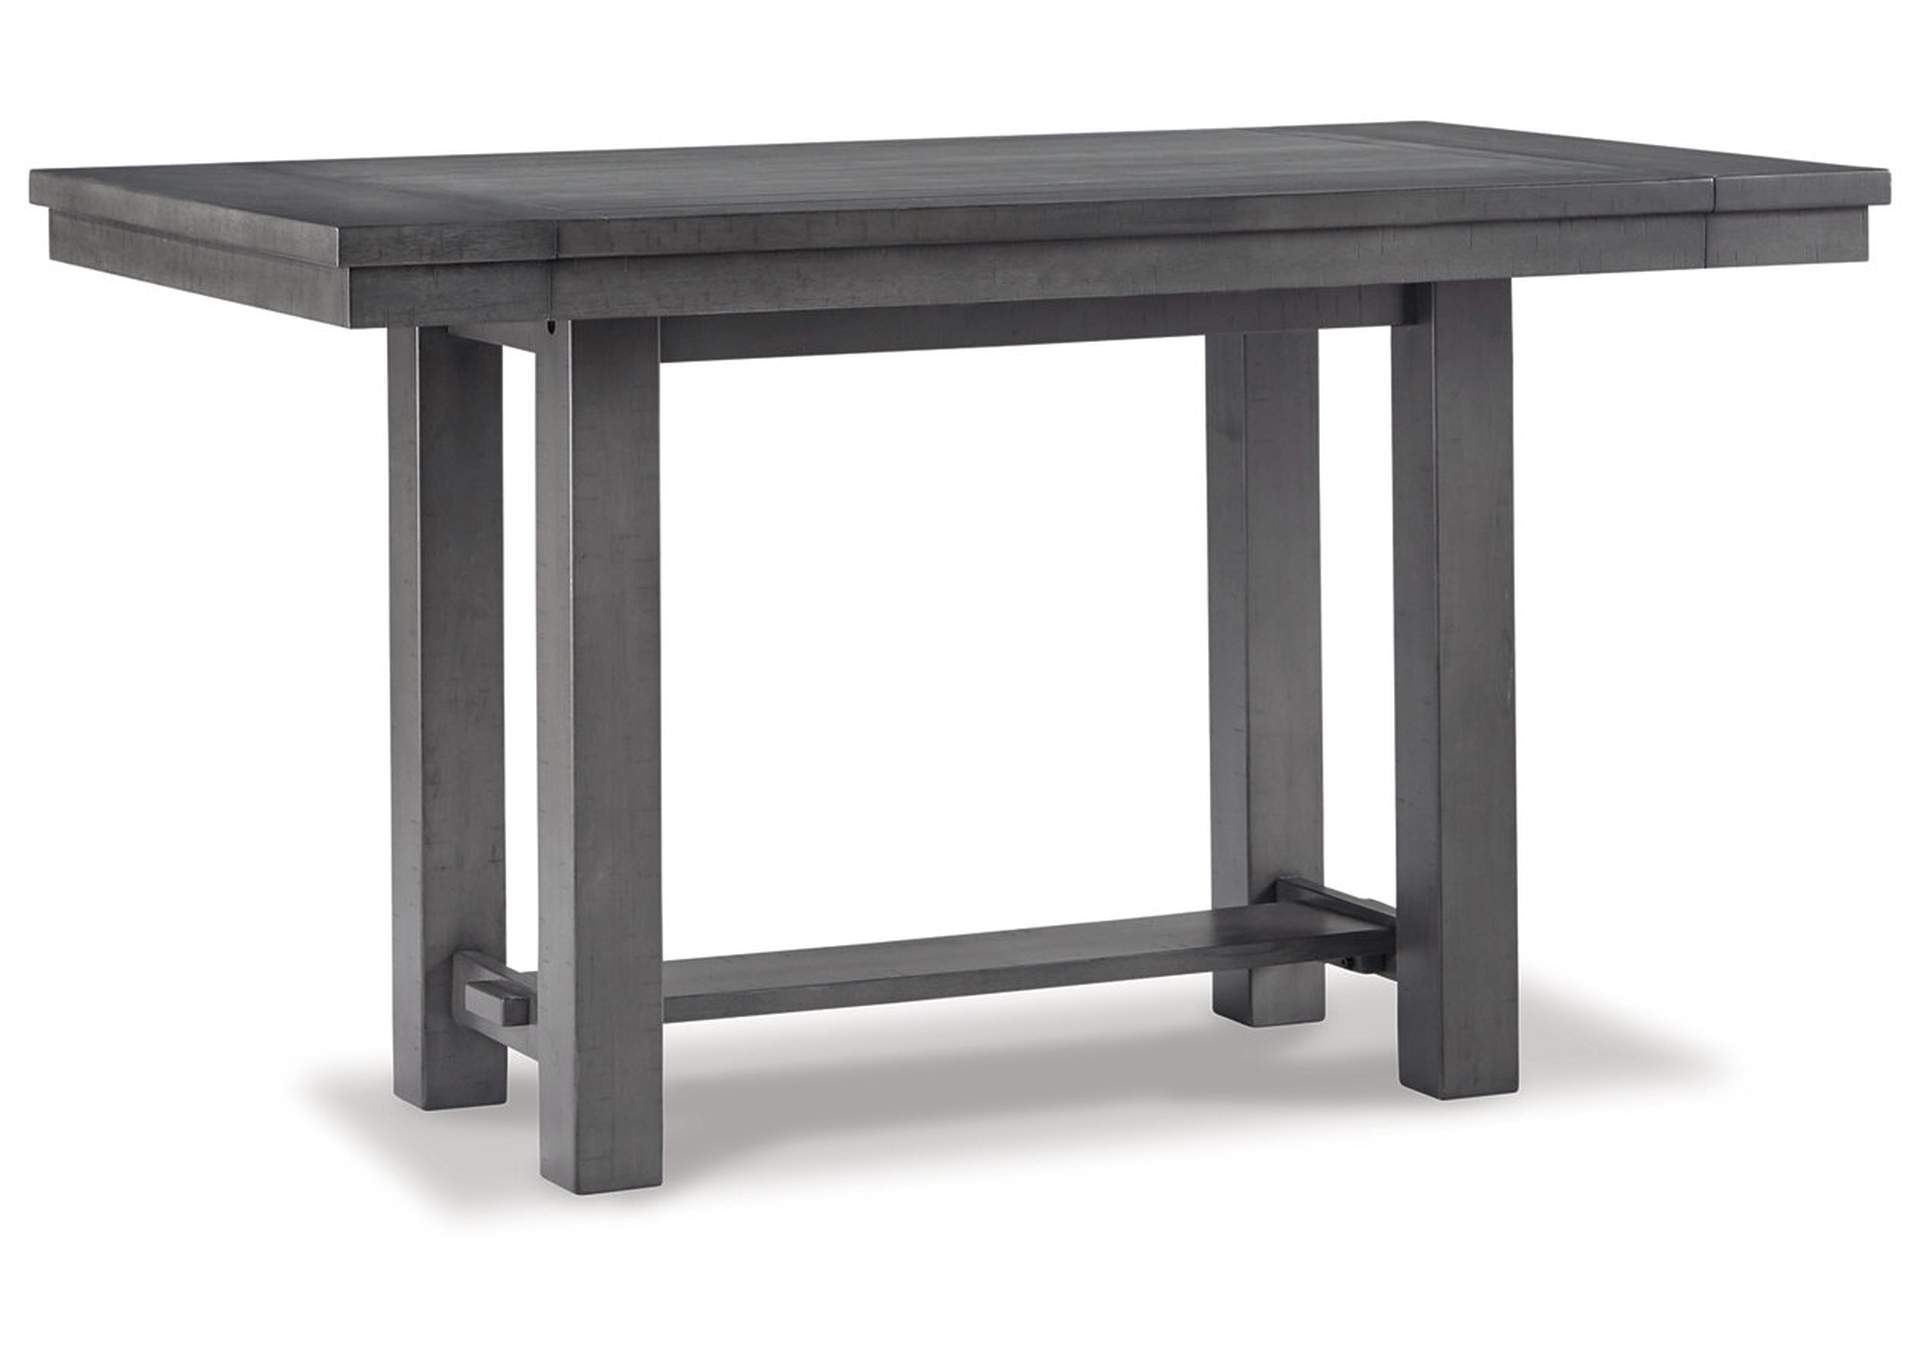 Myshanna Counter Height Dining Extension Table,Signature Design By Ashley